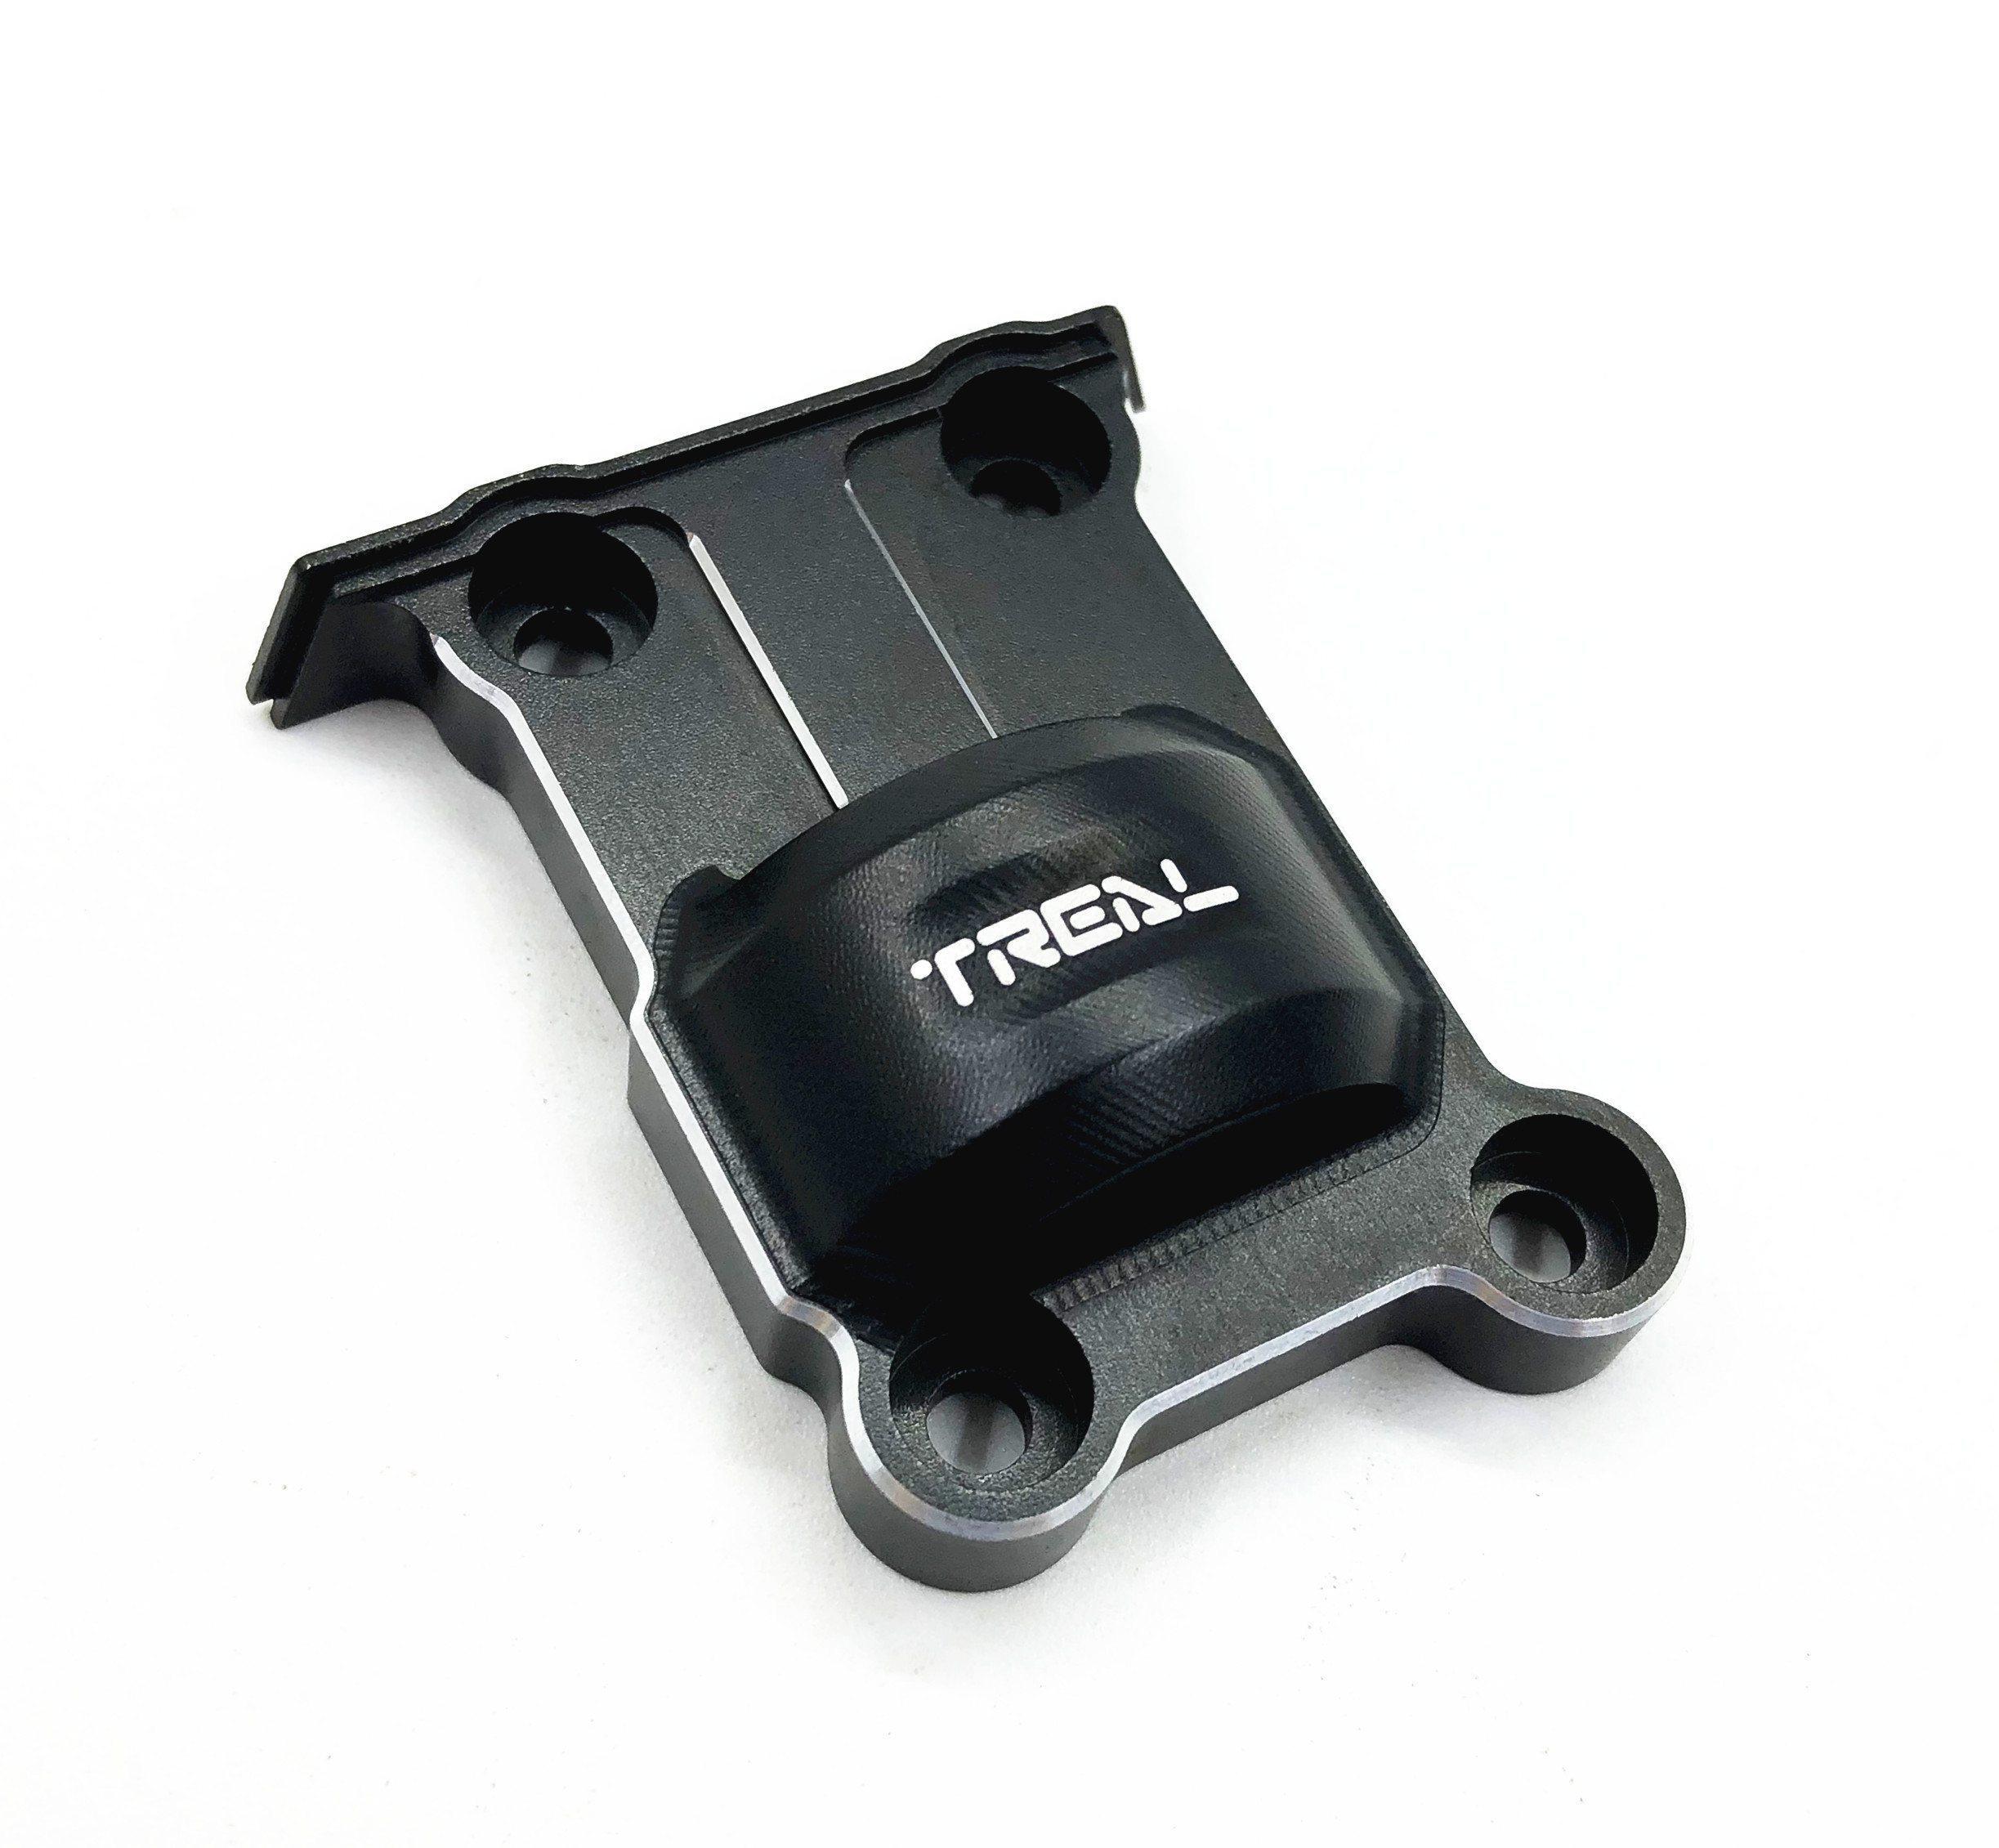 Treal Aluminum 7075 CNC Billet Machined Rear Lower Gear Cover for X-MAXX (Black) ...